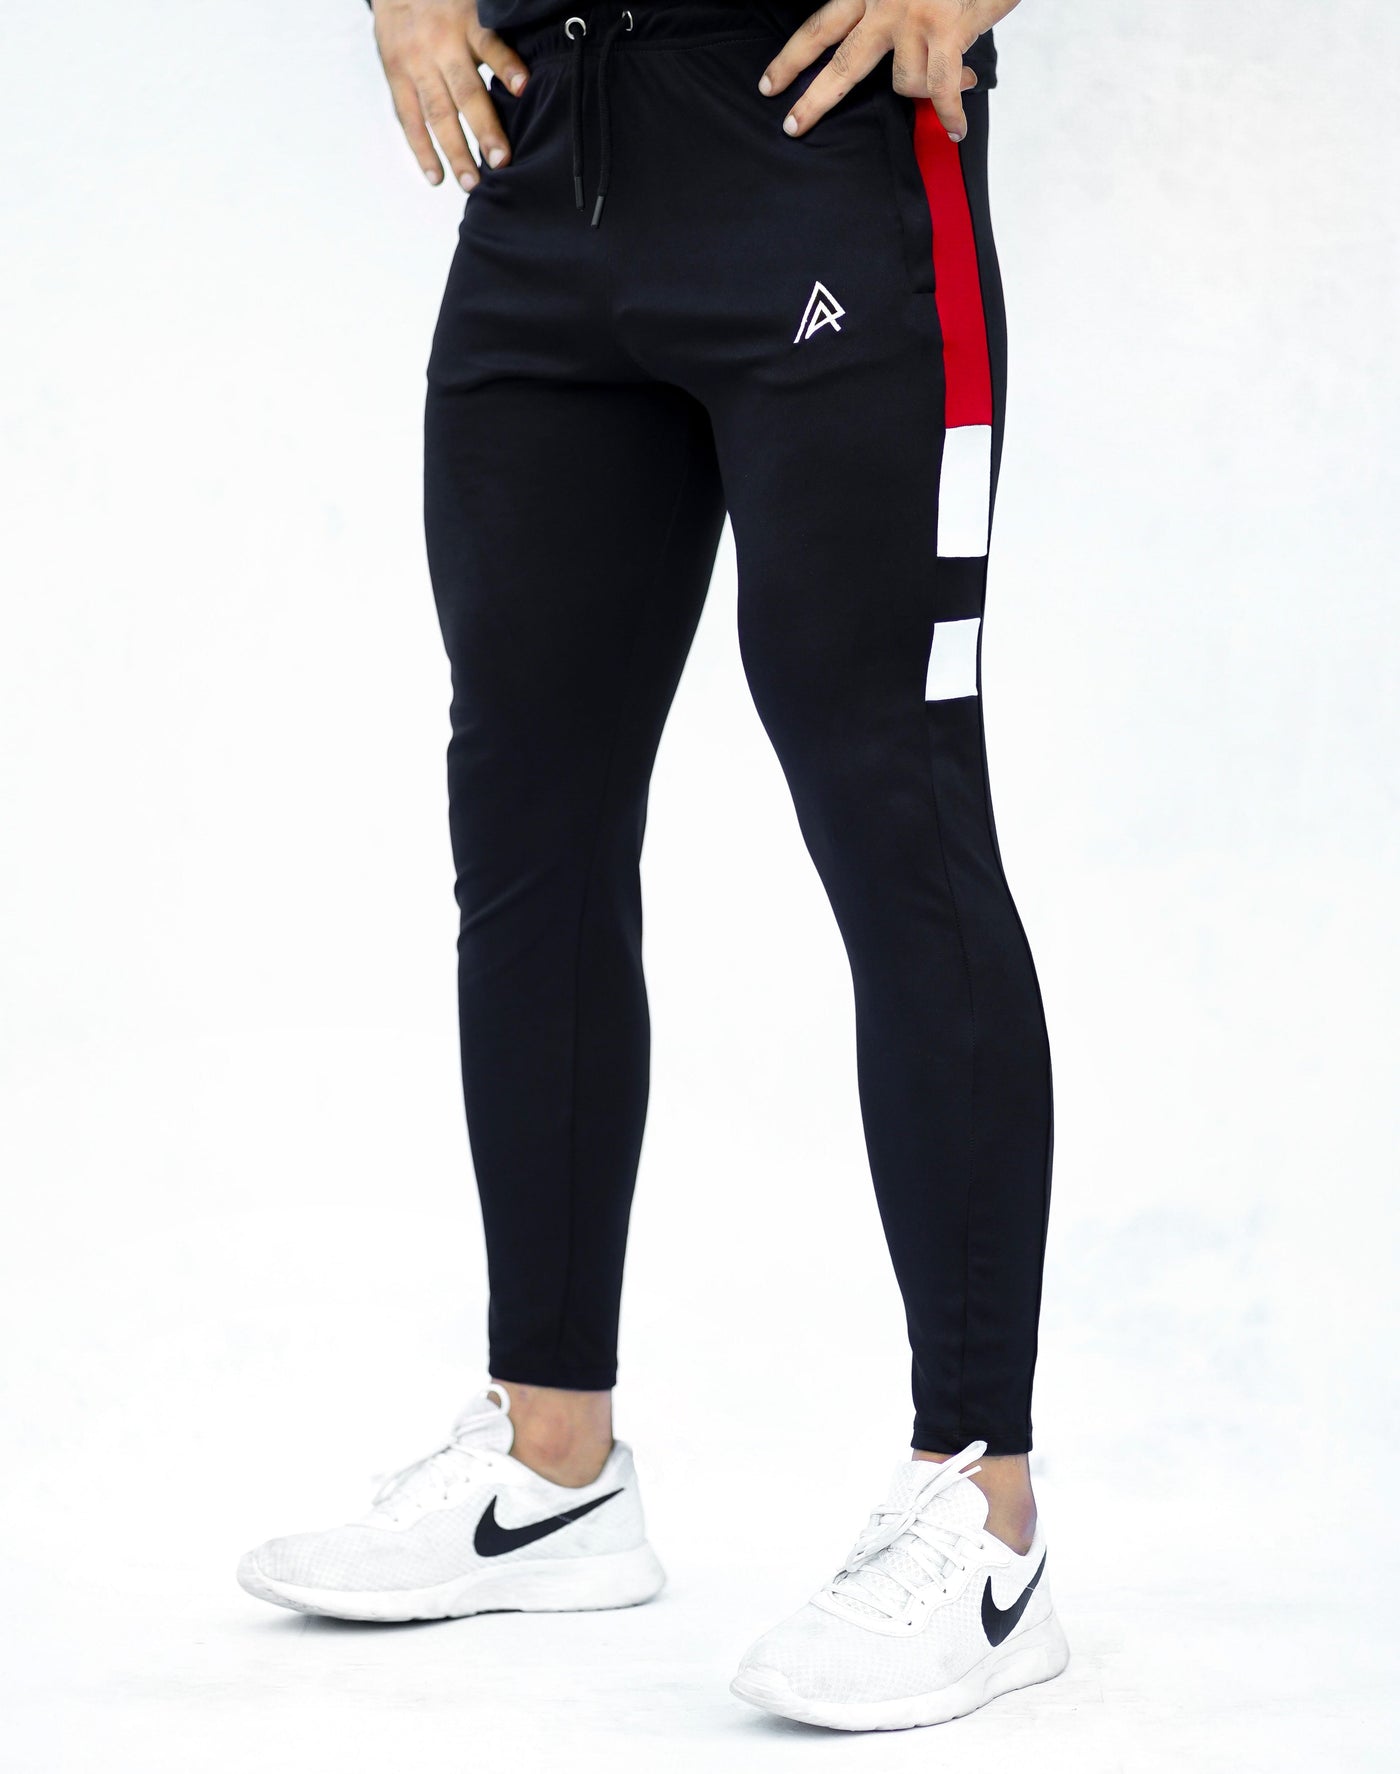 Black with Red/white Sublimated Panel Quick Dry Bottoms